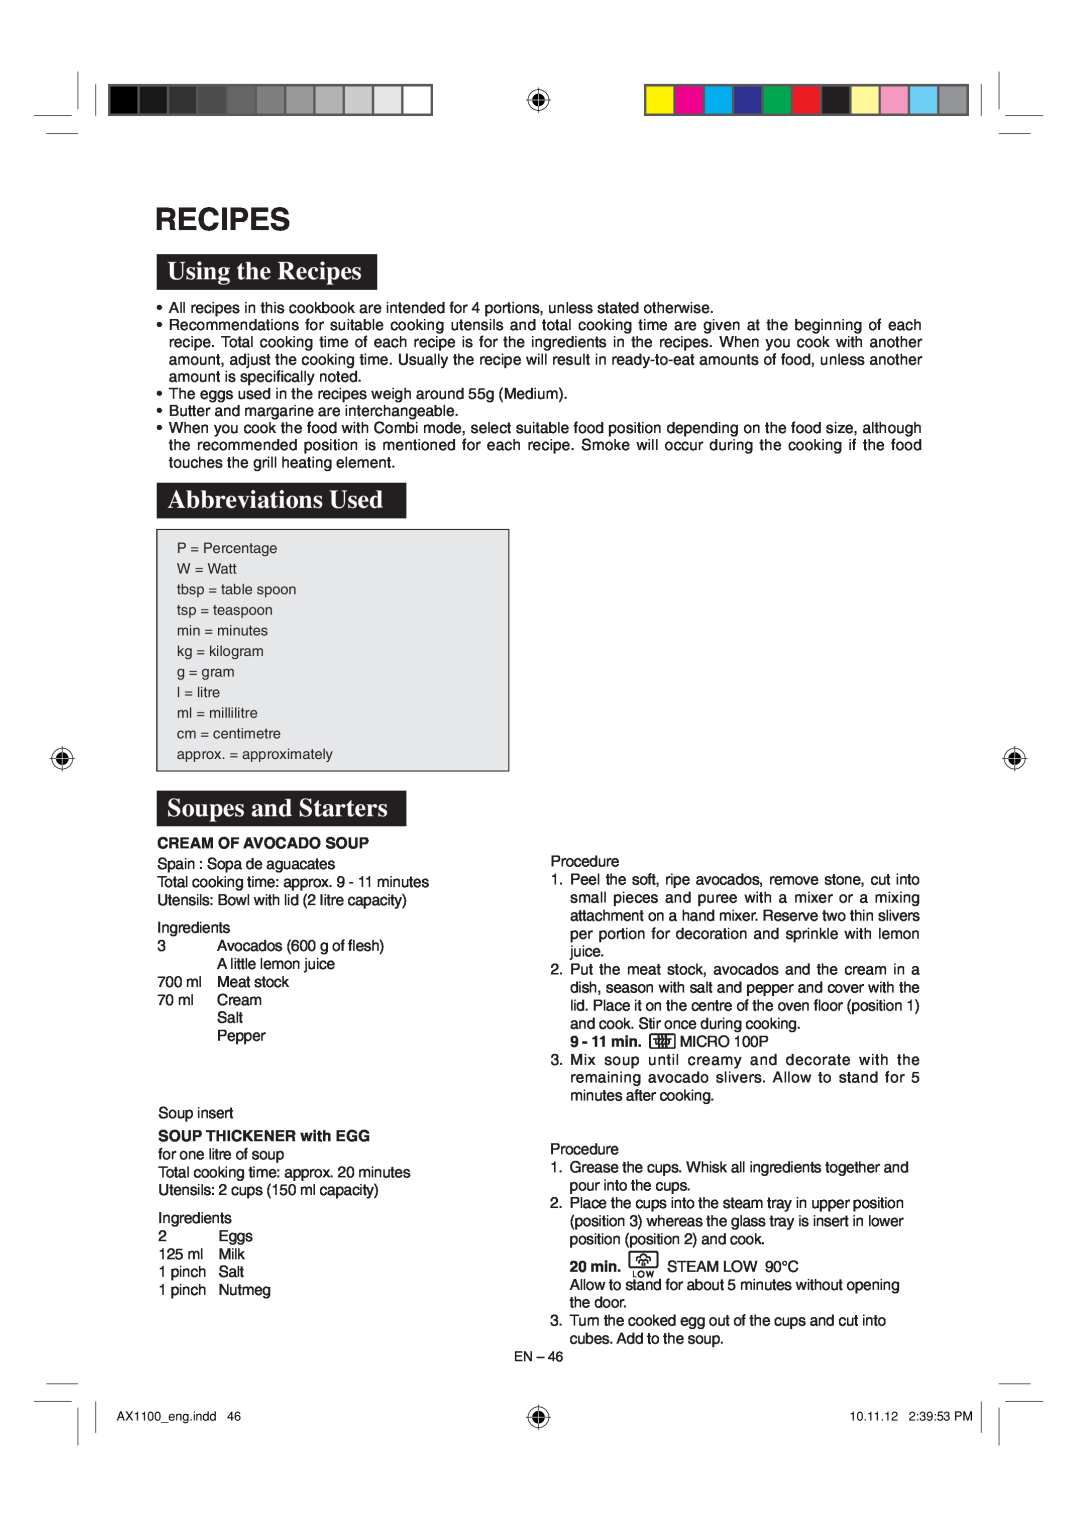 Sharp AX-1100 operation manual Using the Recipes, Abbreviations Used, Soupes and Starters, Cream Of Avocado Soup 